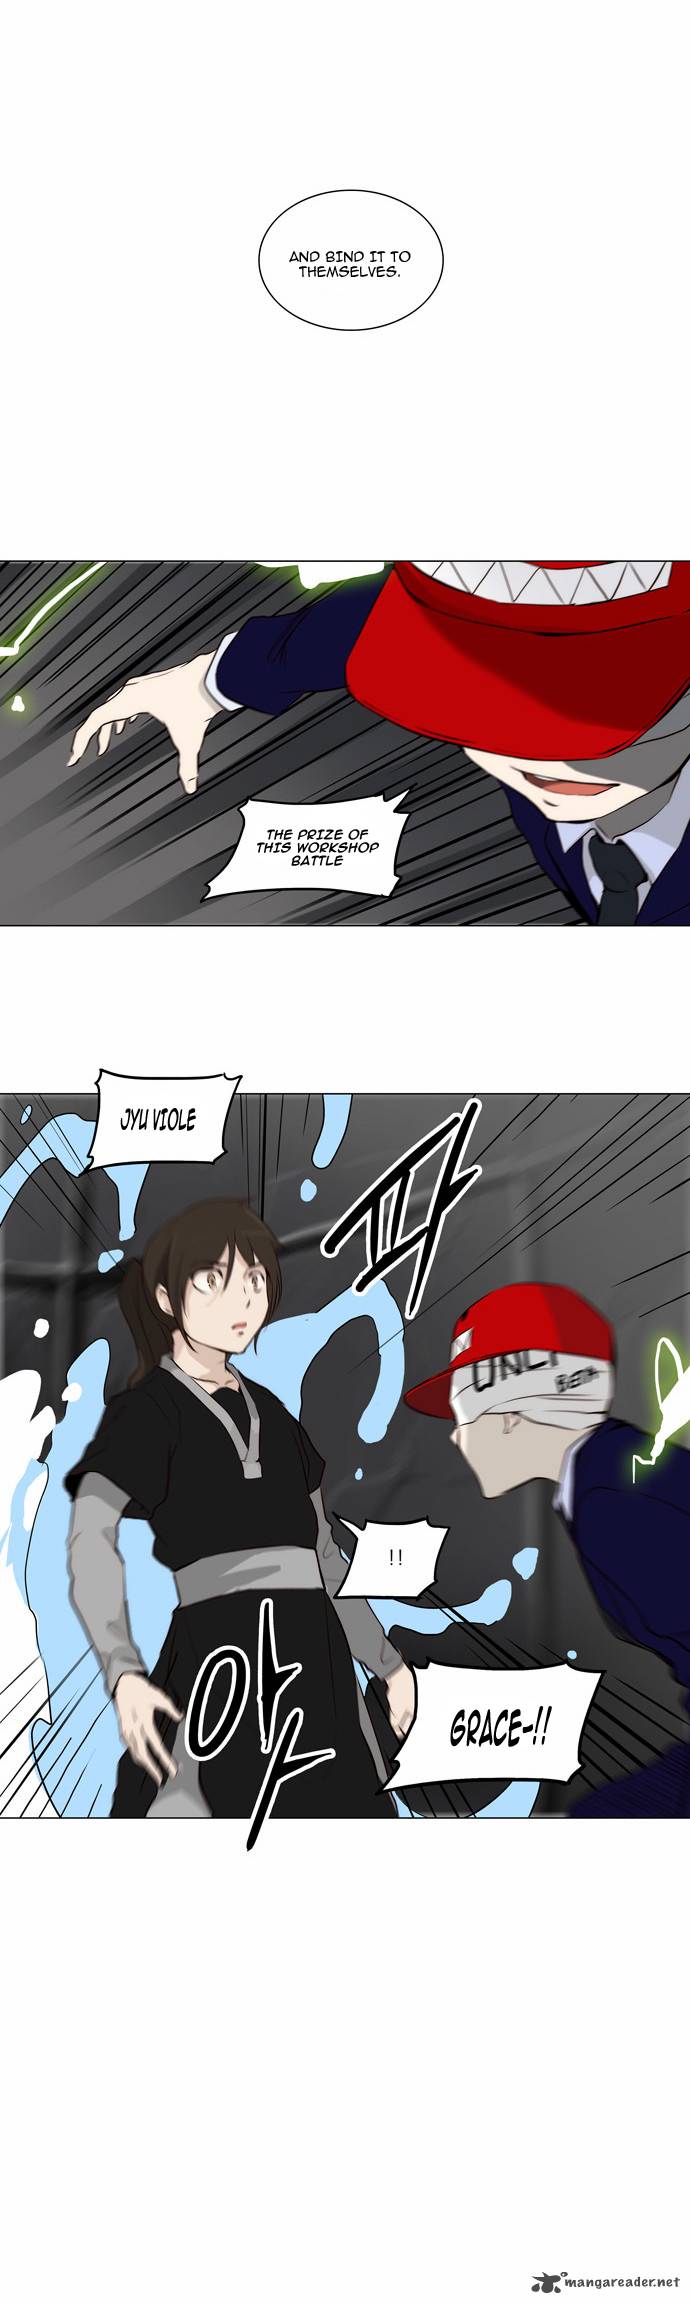 Tower Of God 164 11